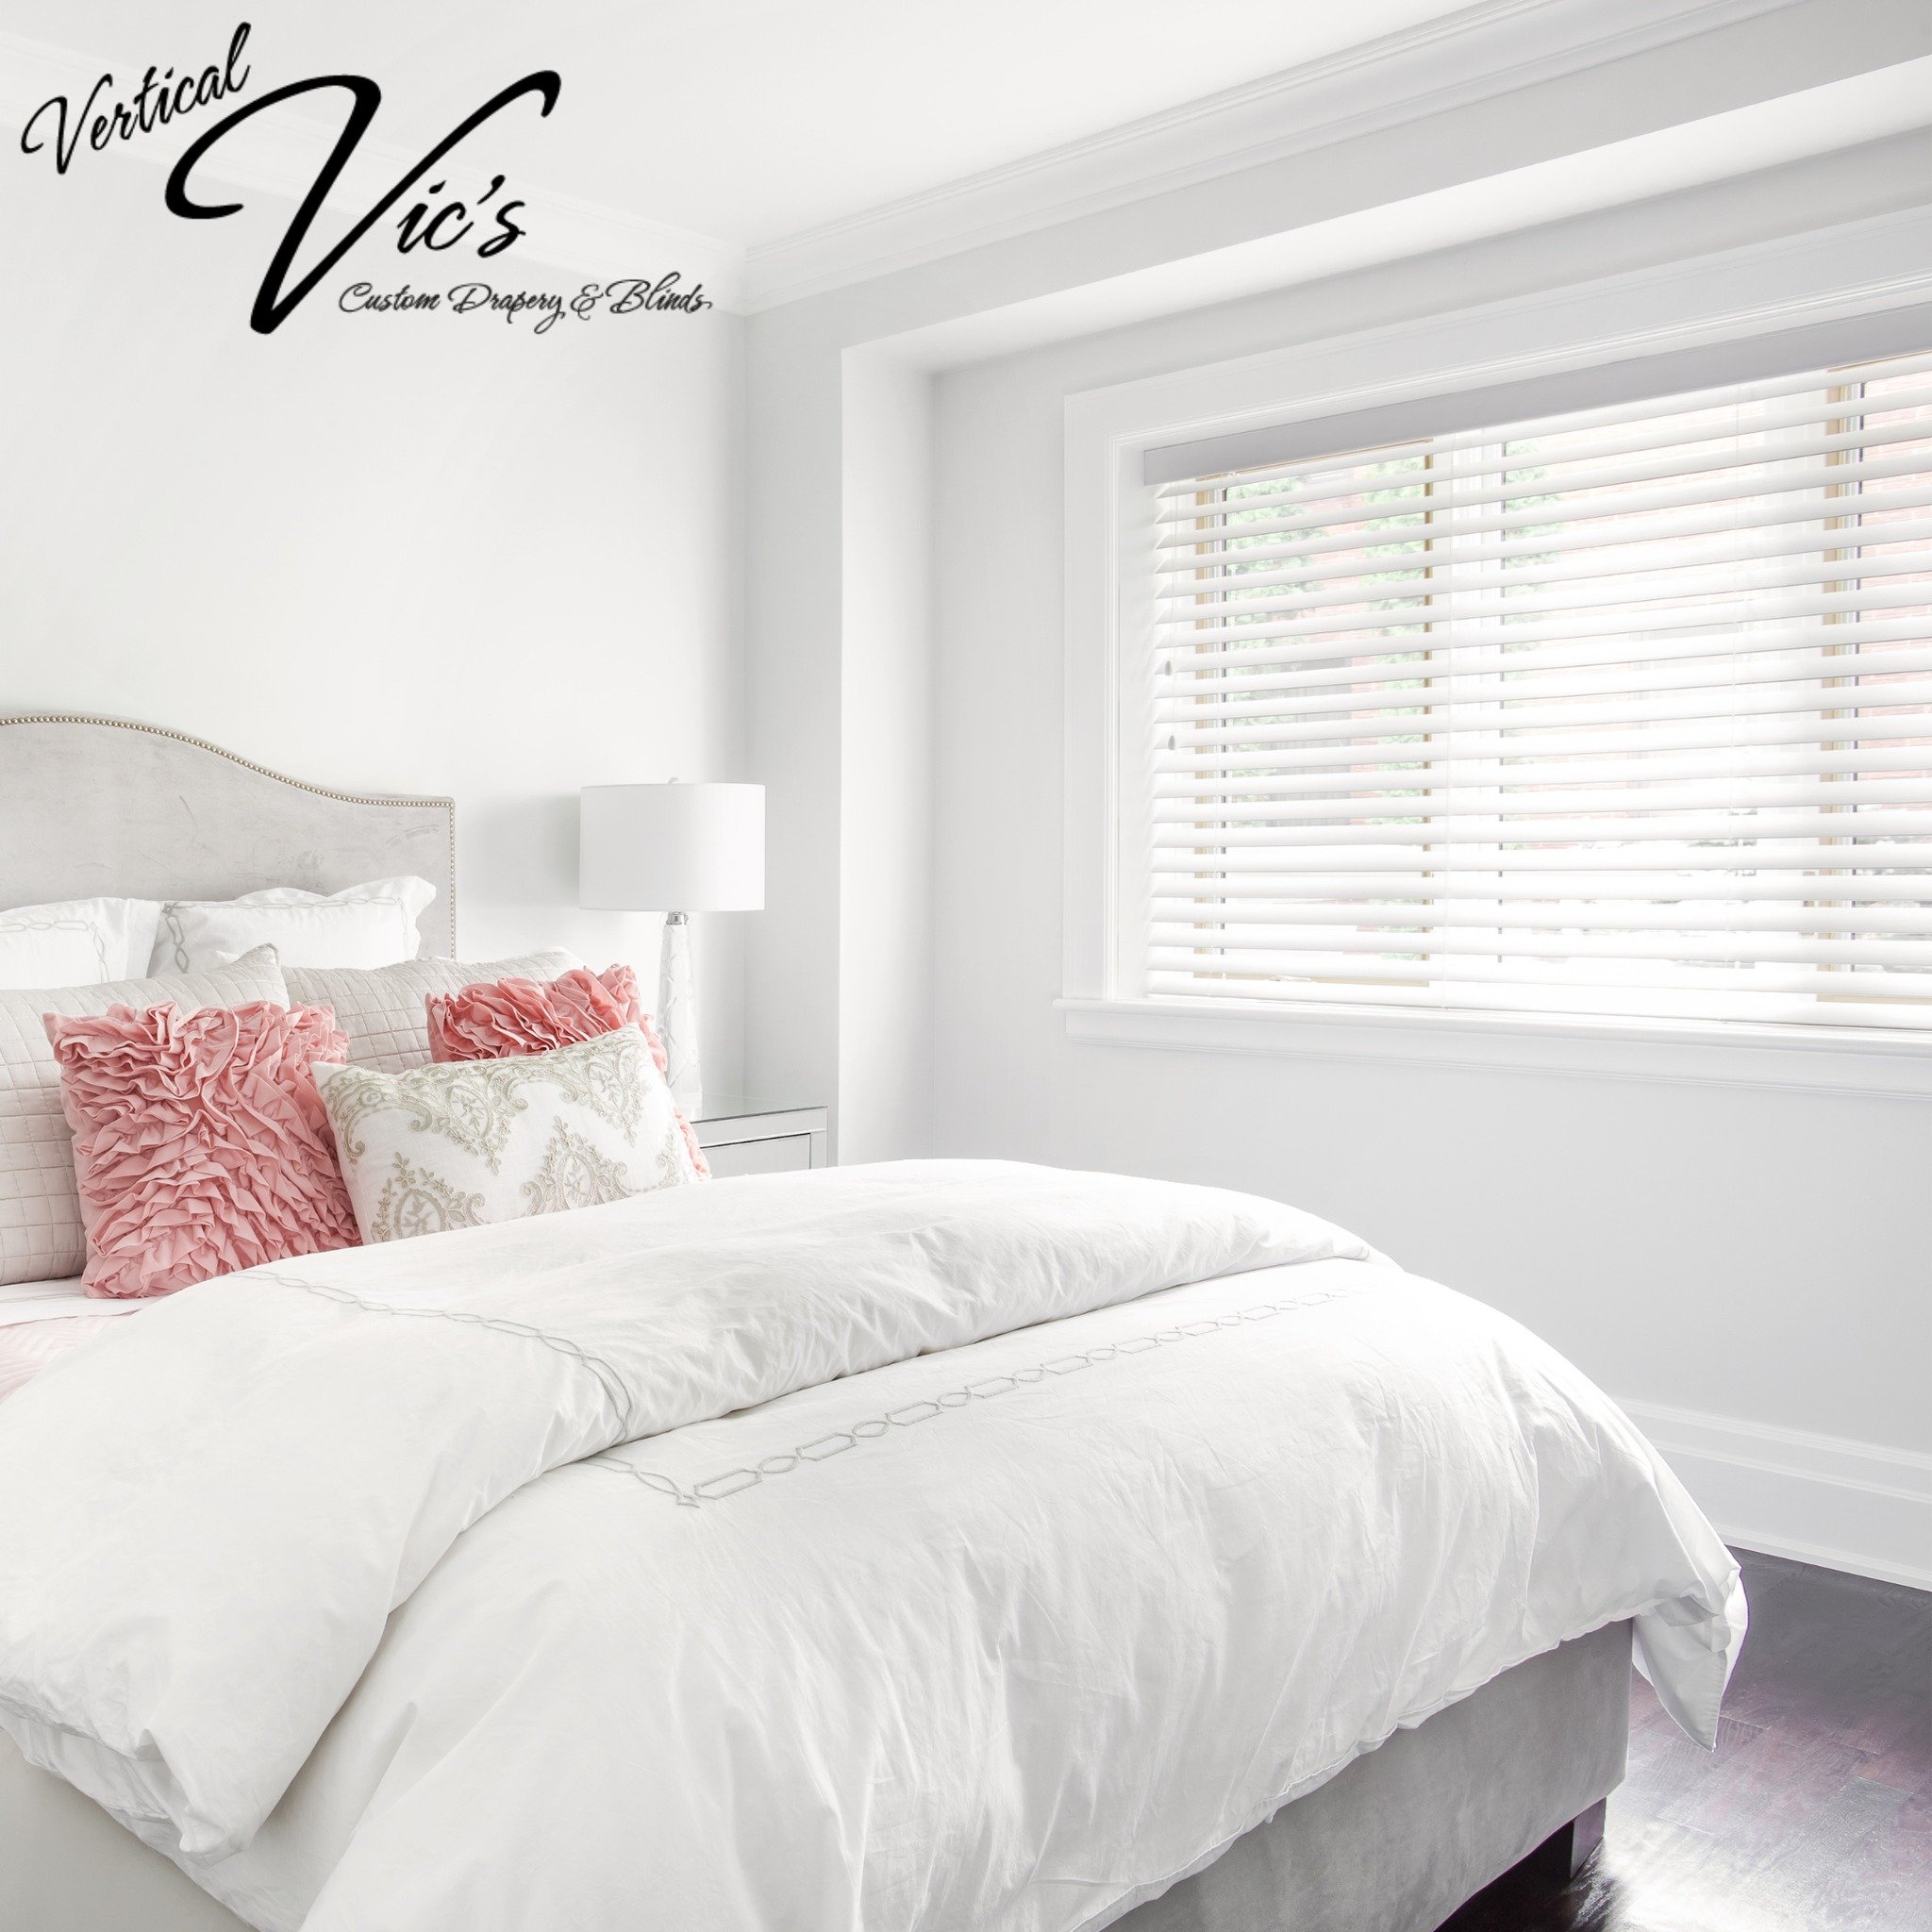 Stand out or seamlessly blend in - your choice, our expertise!  At Vertical Vic&rsquo;s, we understand that every home is unique. Whether you're aiming to make a bold statement with window treatments that capture attention or seeking seamless integra